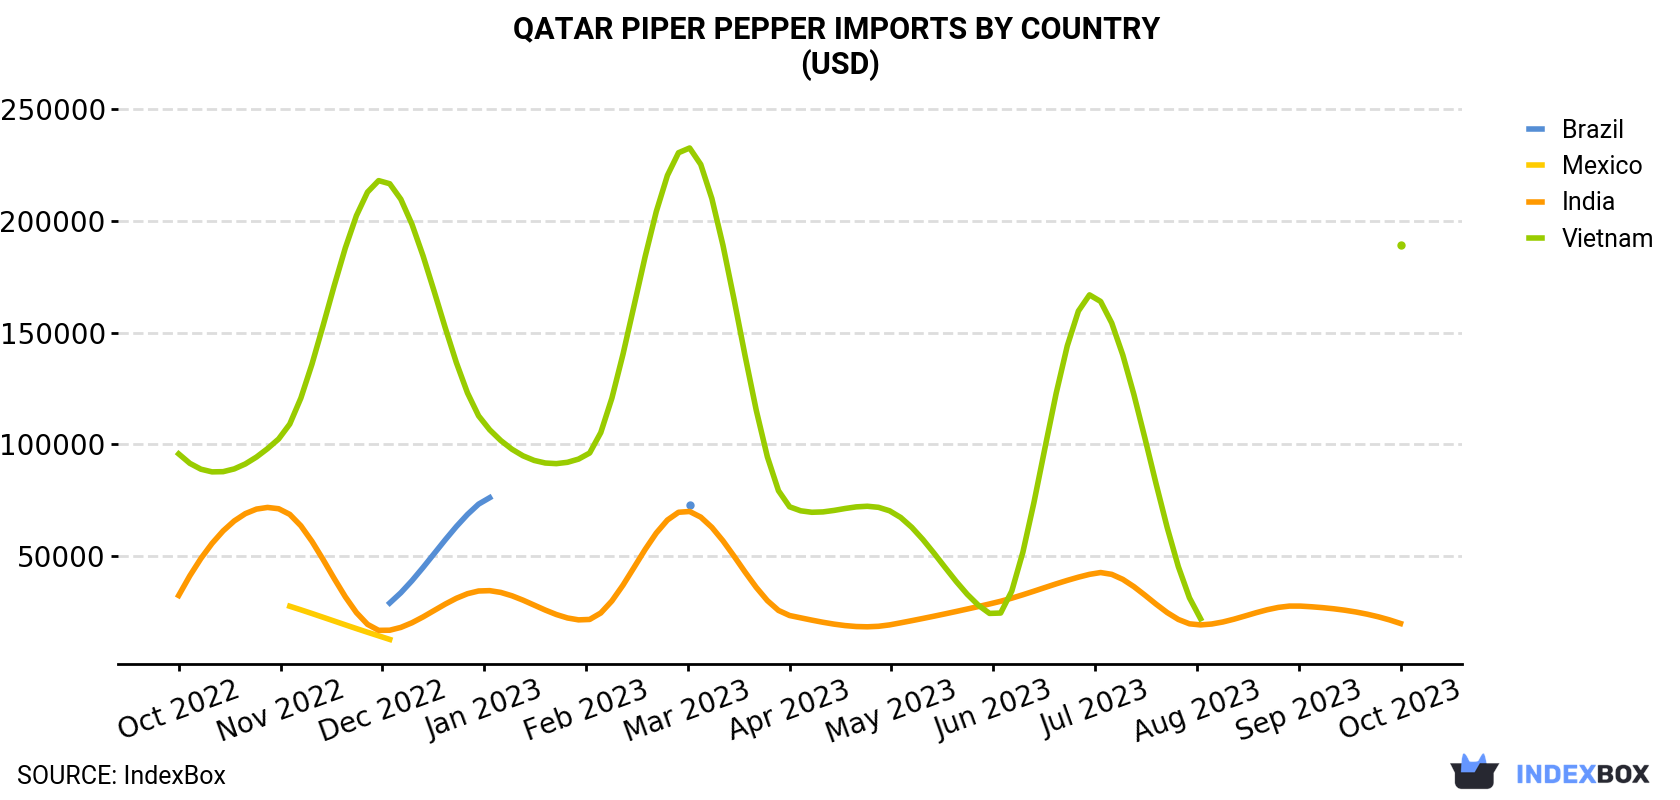 Qatar Piper Pepper Imports By Country (USD)